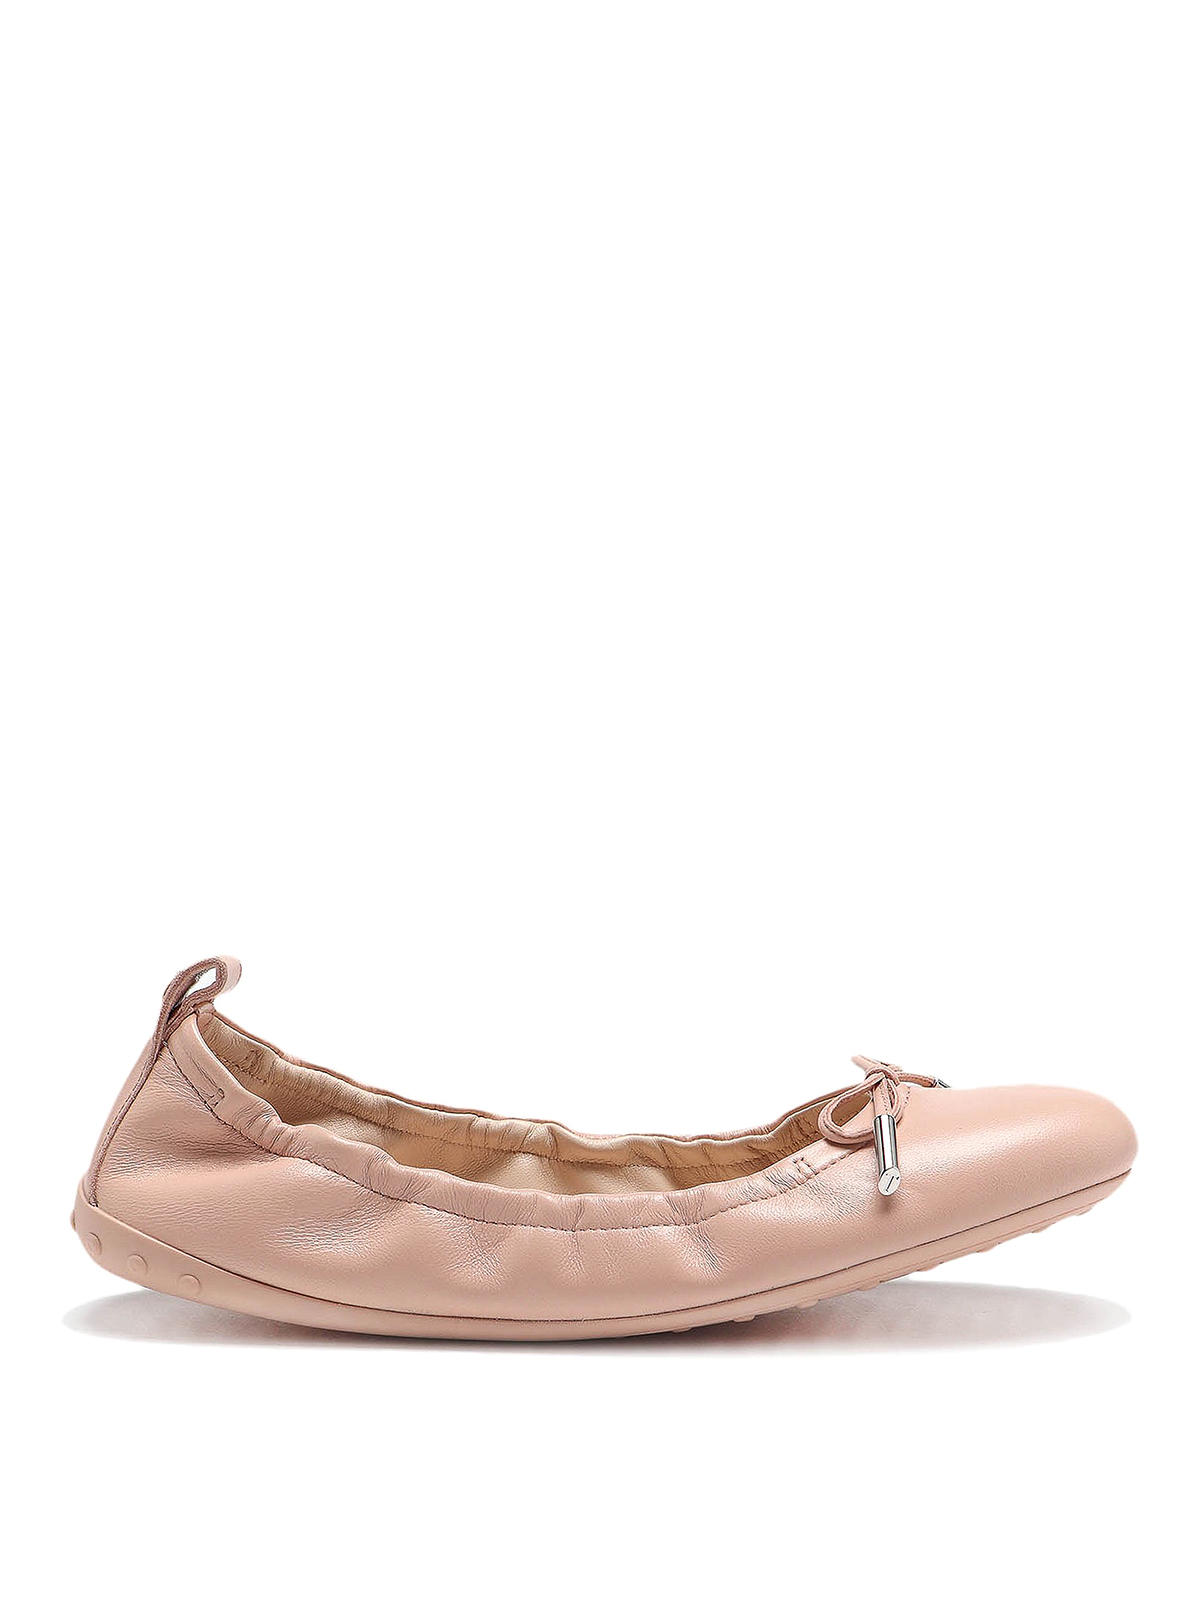 TOD'S BOW LEATHER BALLERINAS